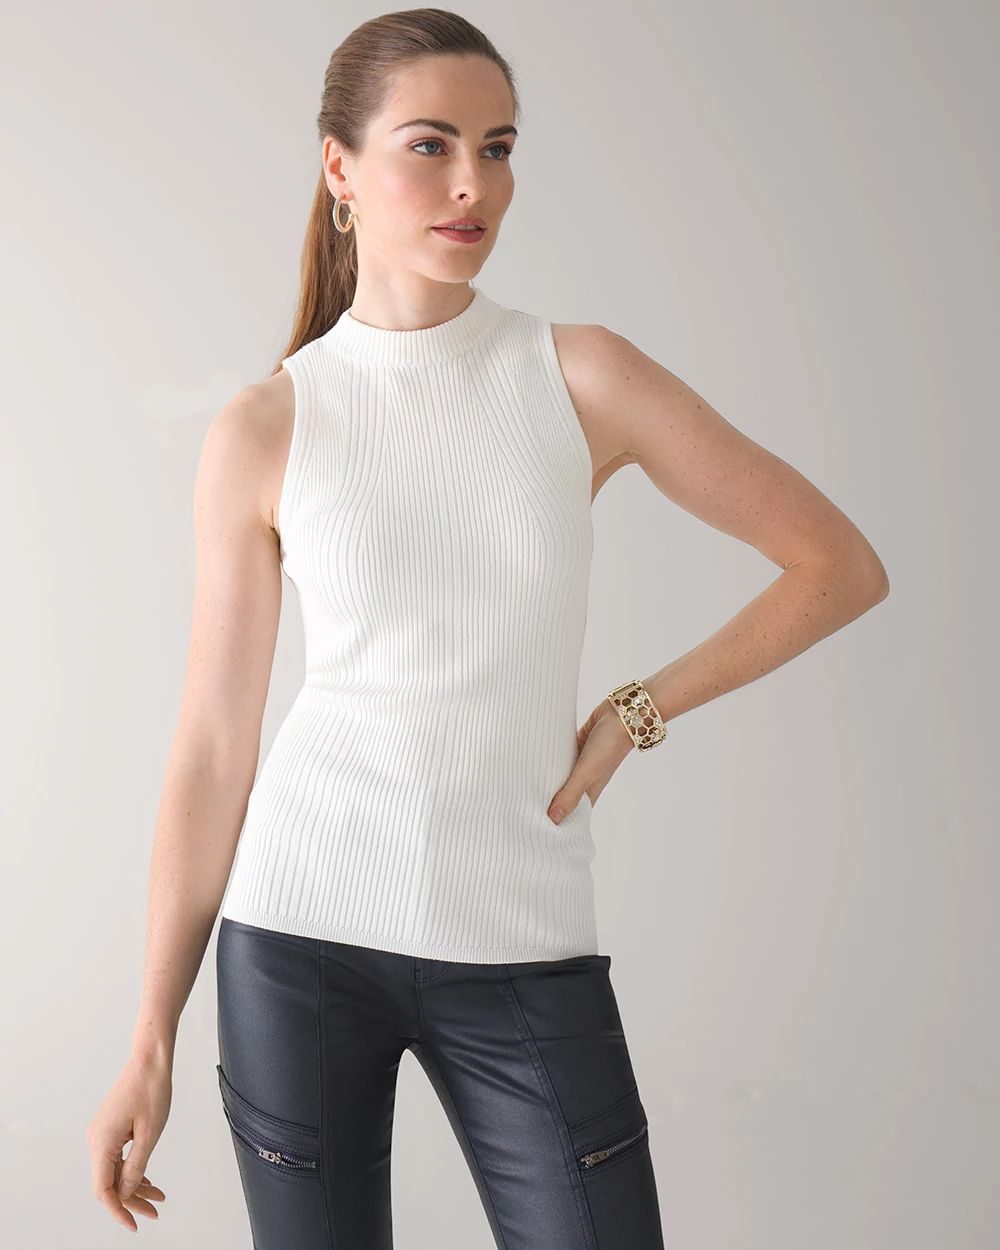 Sleeveless Mock Neck Pullover click to view larger image.